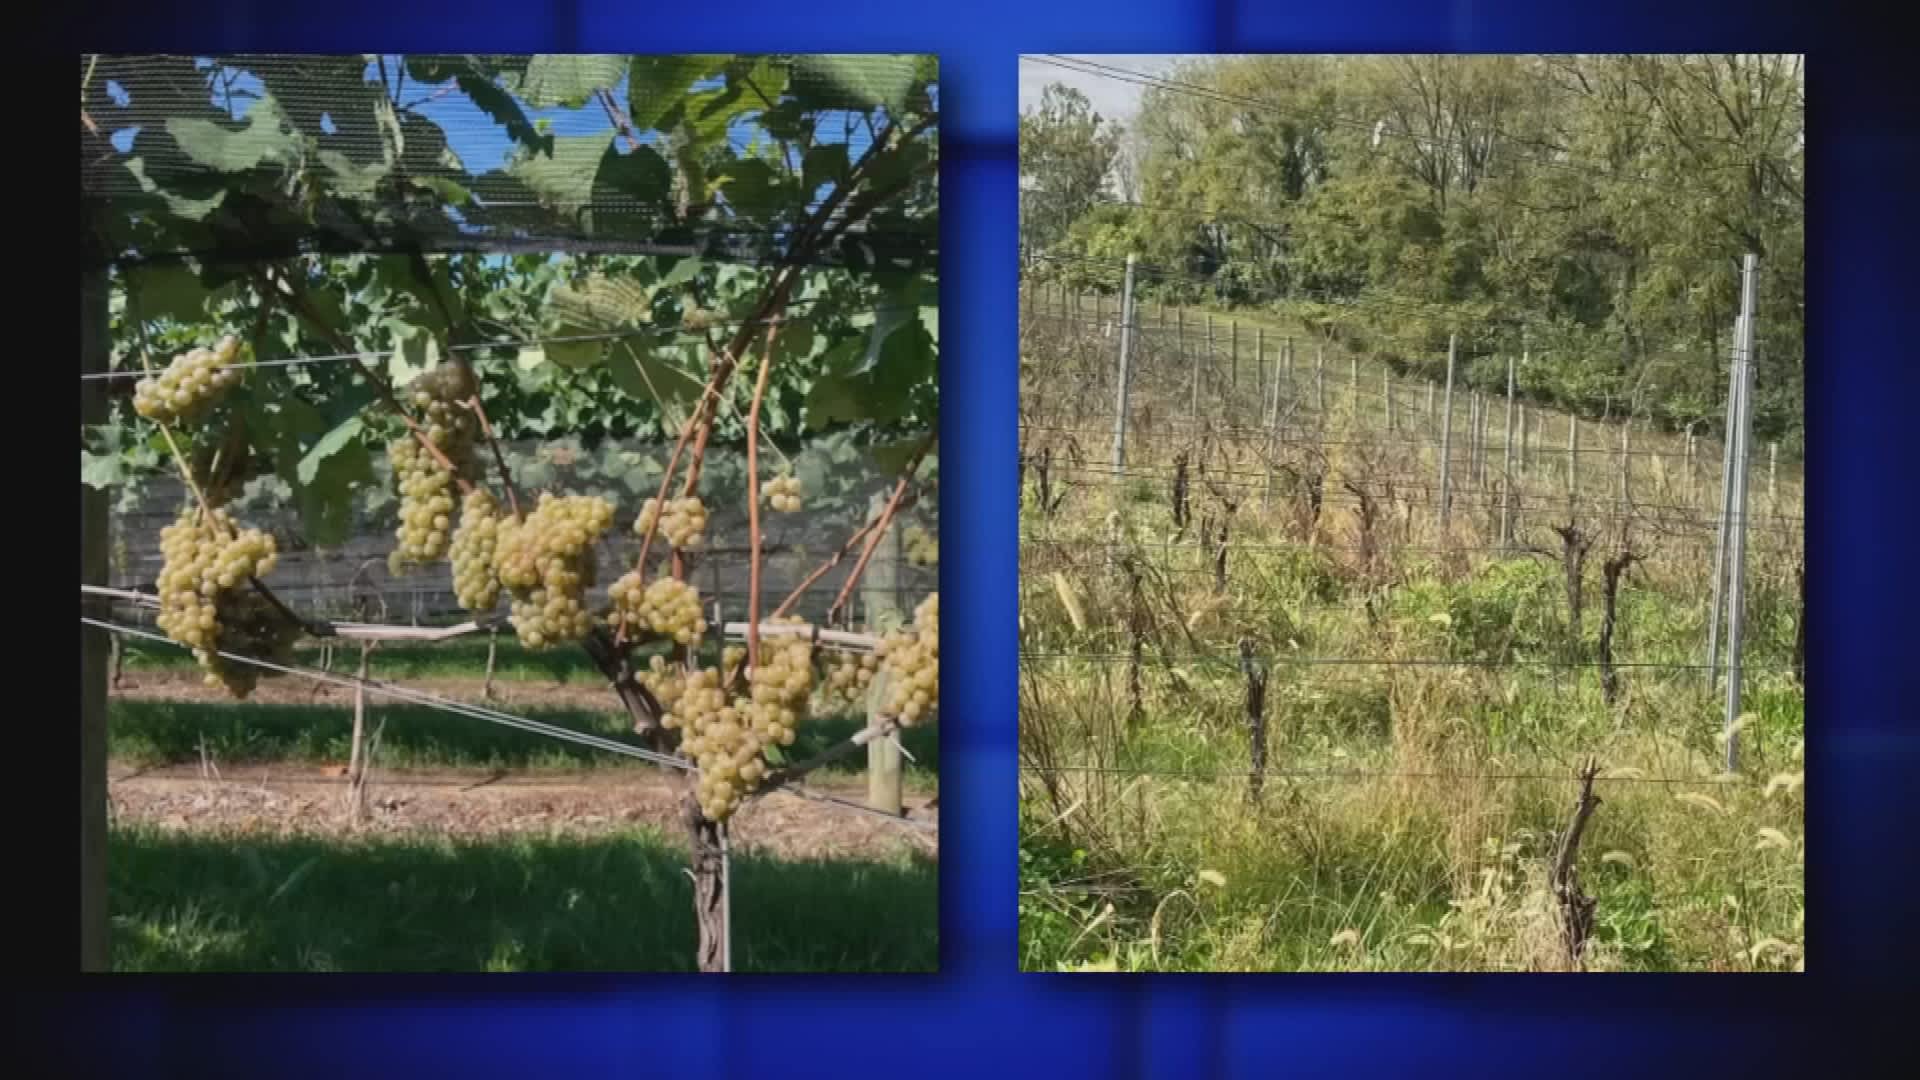 Left photo: Healthy vines bearing grapes. Right photo: Vines destroyed by spotted lanternflies.